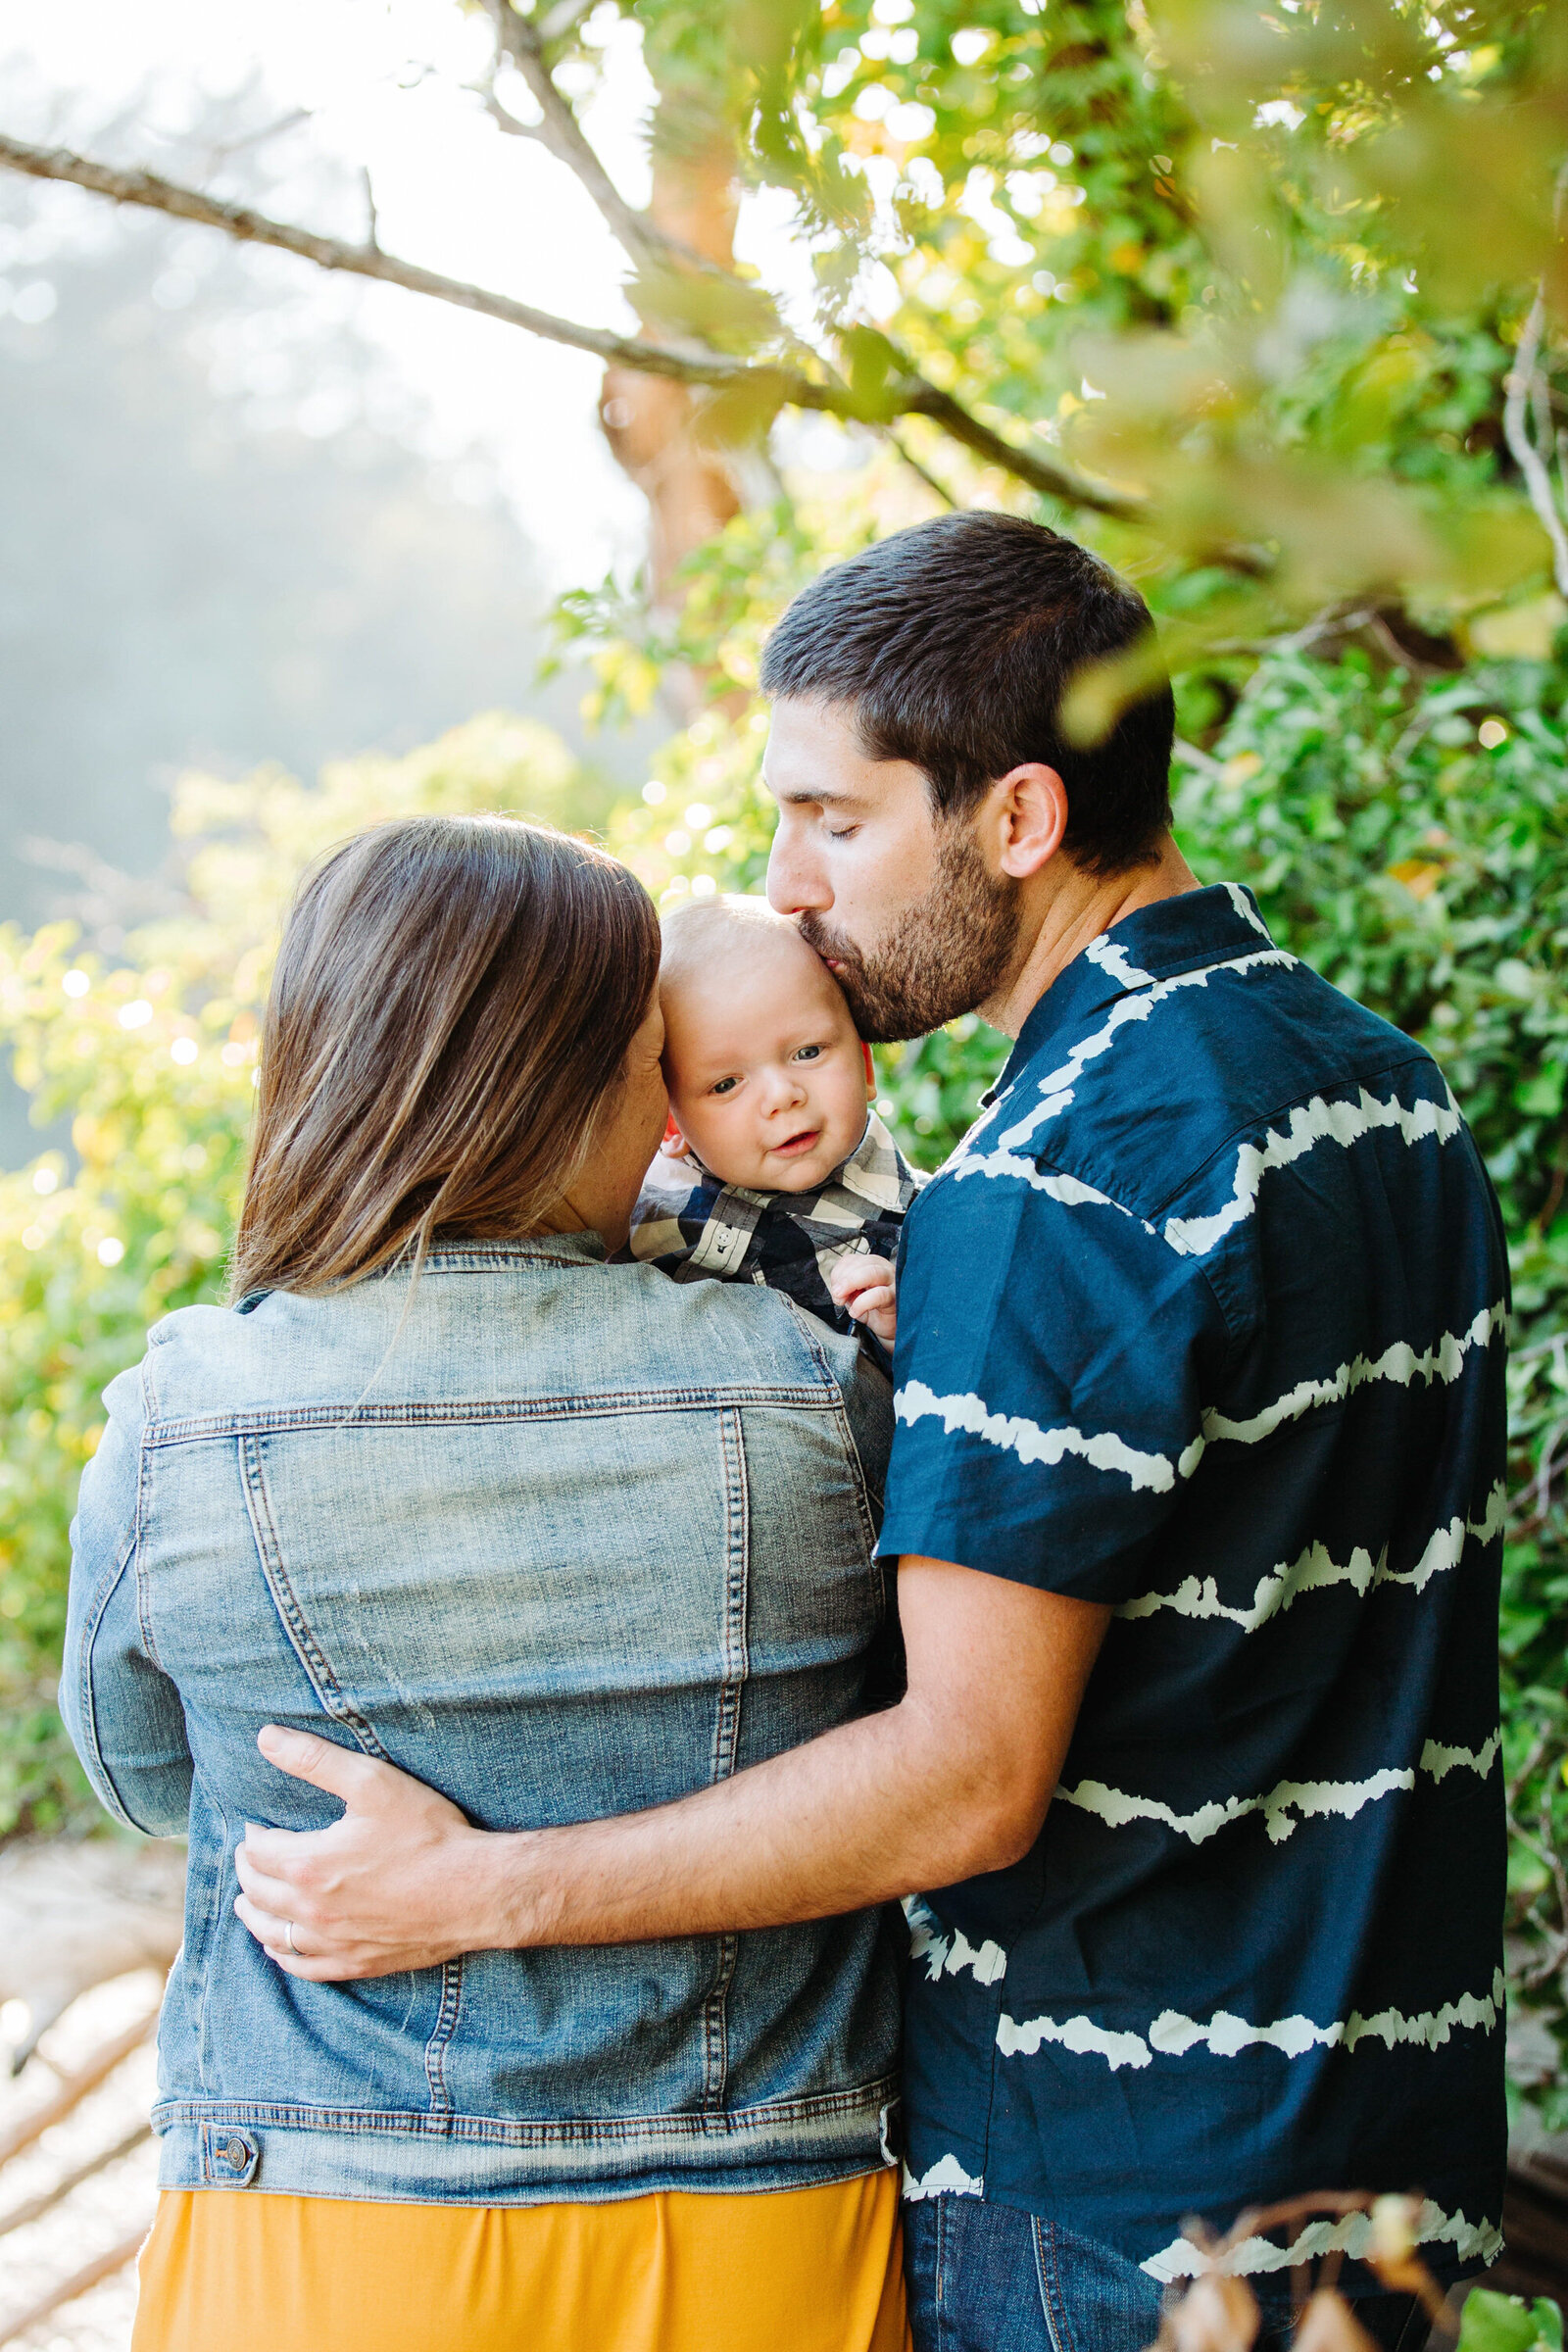 cameron-zegers-photography-seattle-family-photographer-15